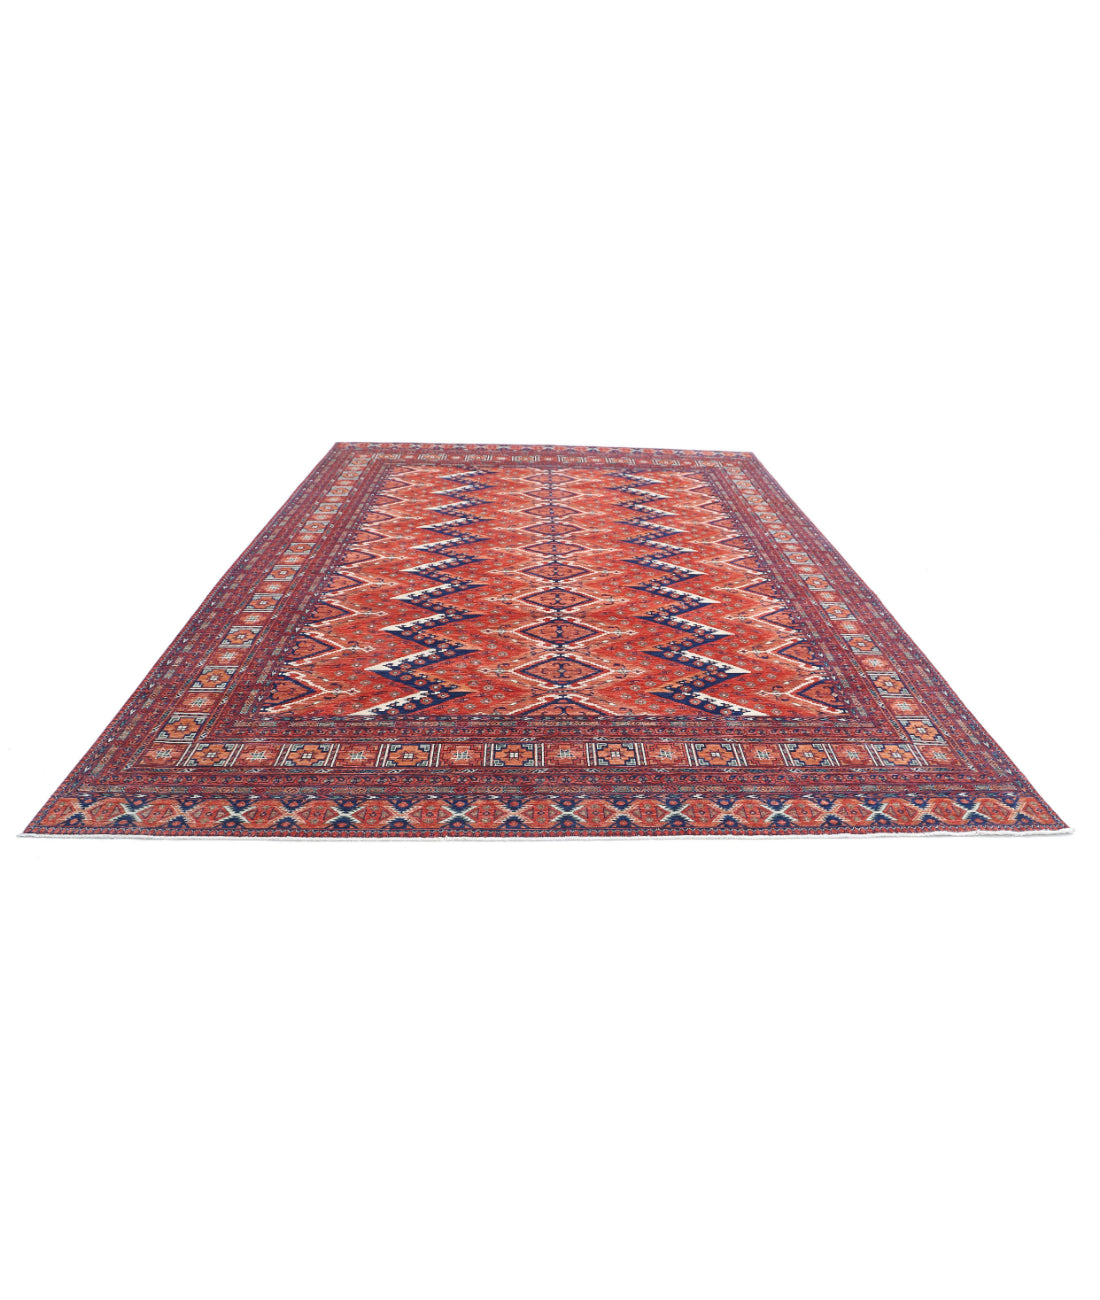 Humna 10'0'' X 13'8'' Hand-Knotted Wool Rug 10'0'' x 13'8'' (300 X 410) / Multi / Red